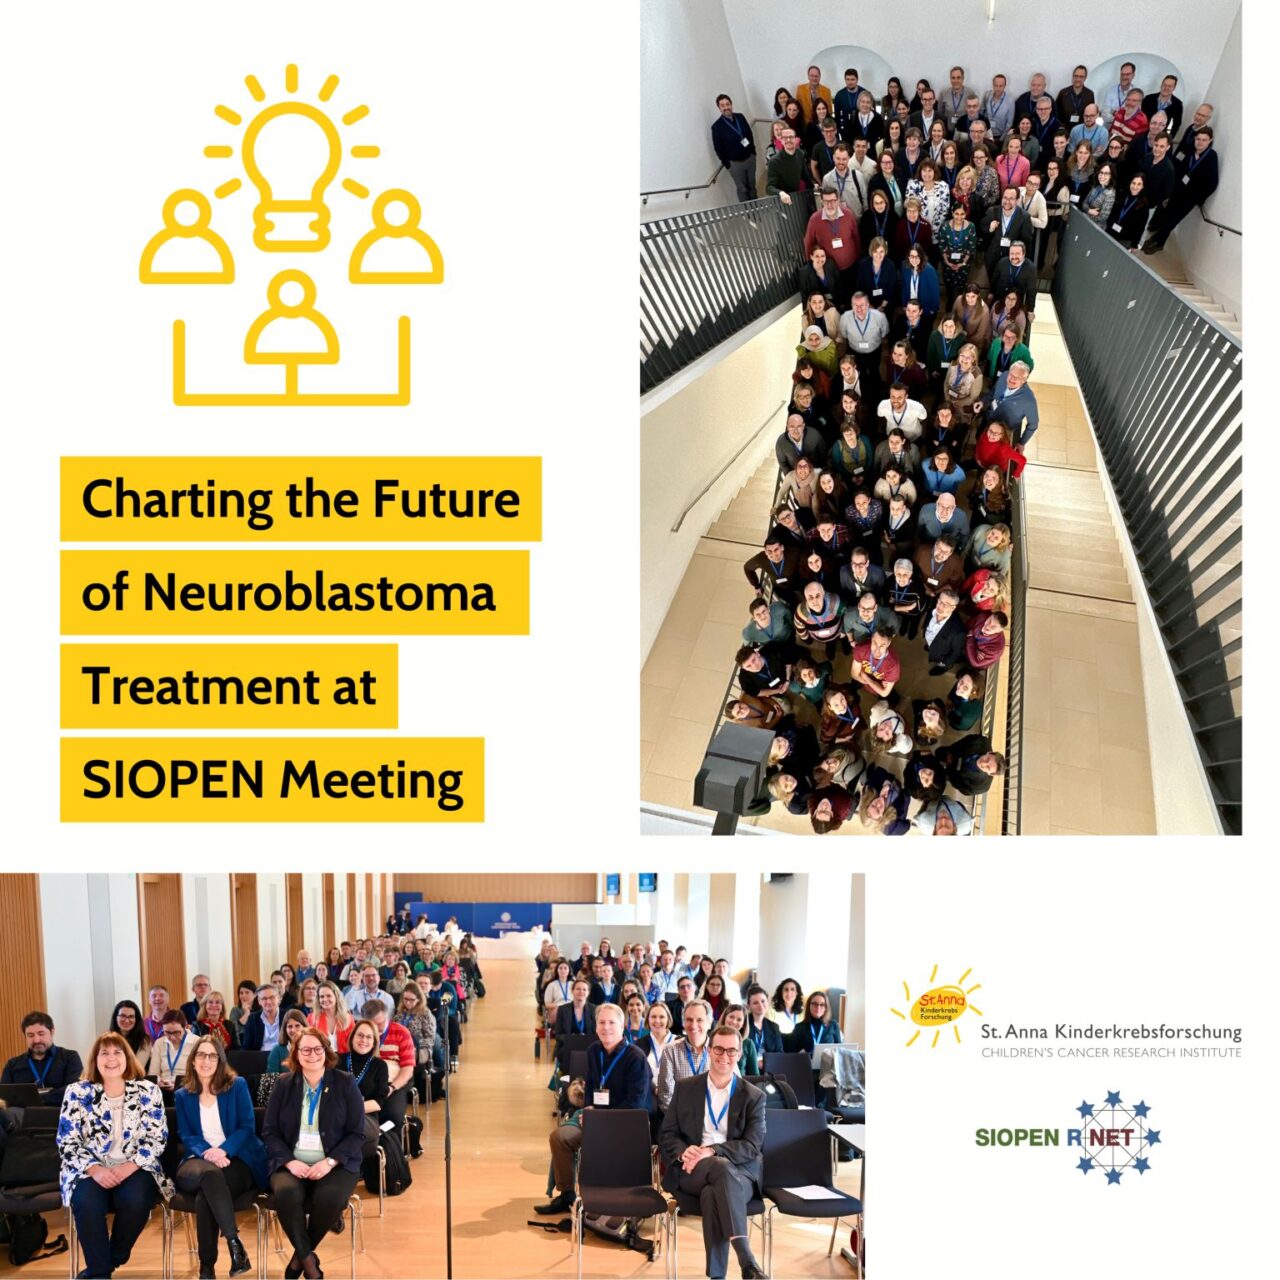 Charting the Future of Neuroblastoma Treatment at SIOPEN Meeting – St. Anna Children’s Cancer Research Institute